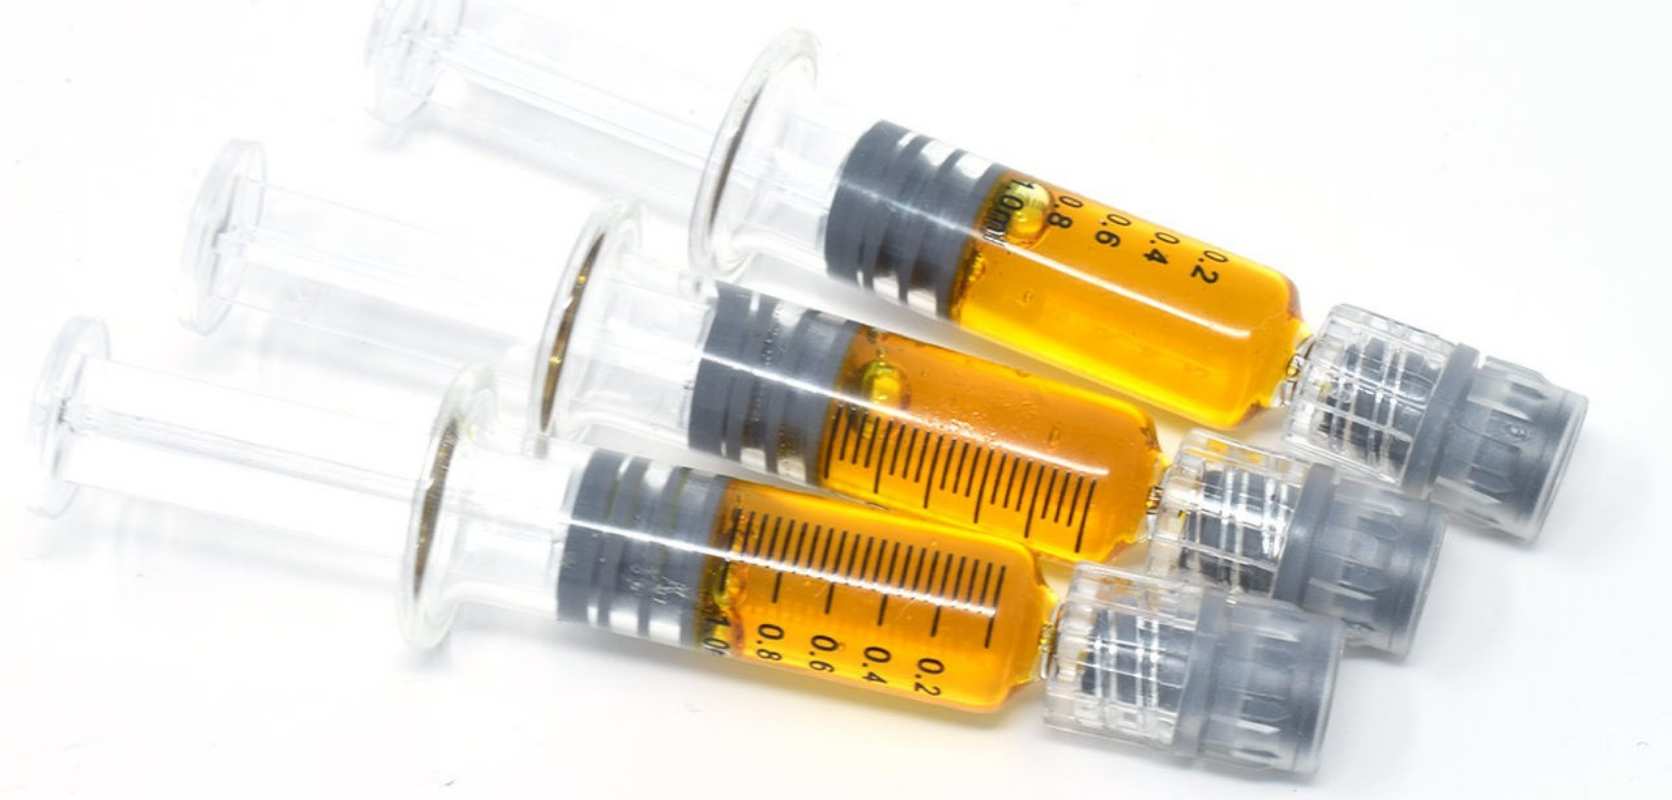 This guide on how to fill distillate syringes helped you understand the process more clearly.